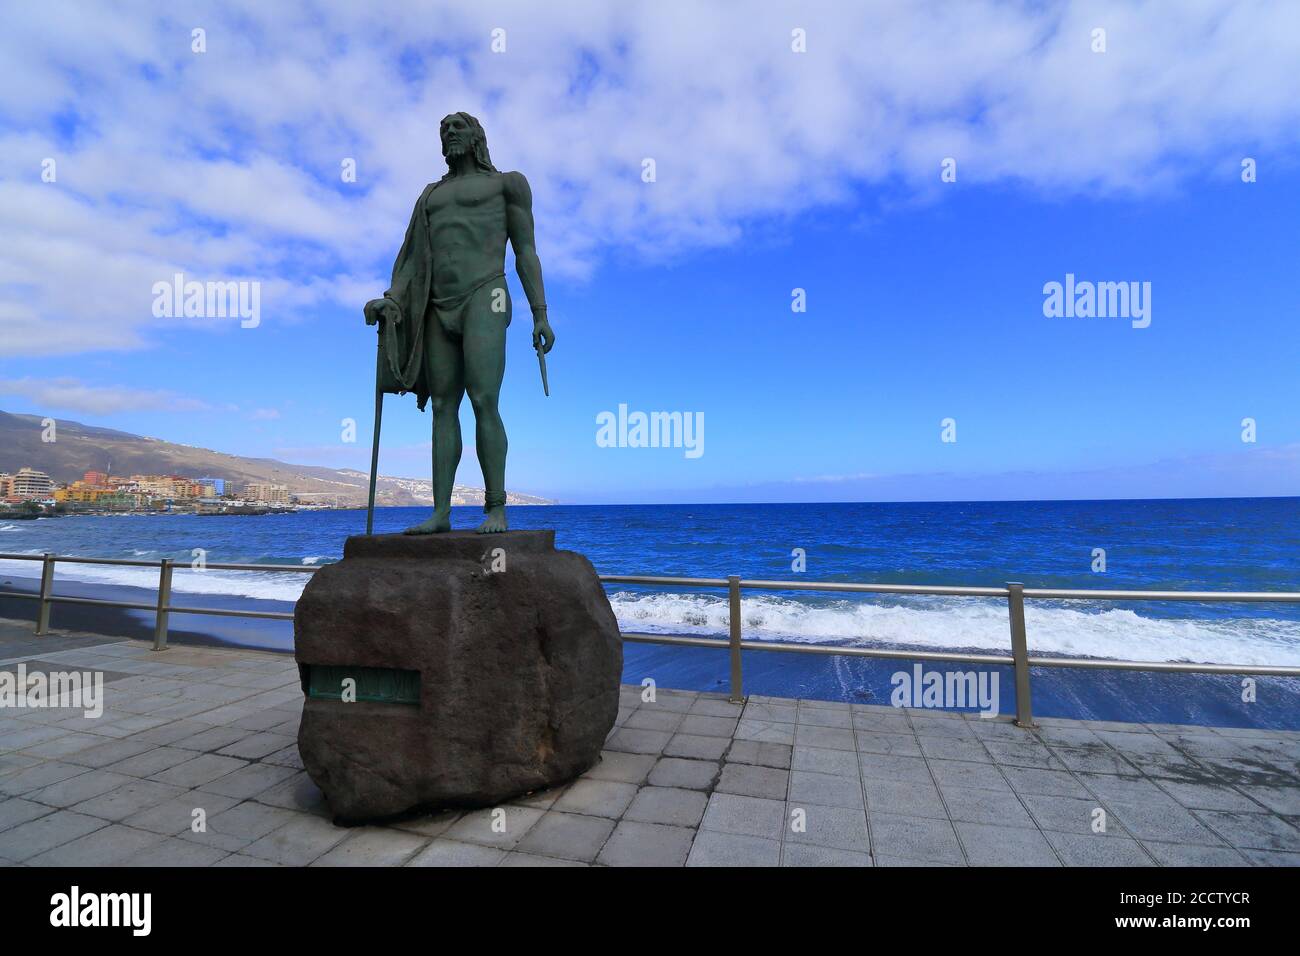 Statue of a Guanche situated in Candelaria, Tenerife, Canary Islands, Spain. Stock Photo